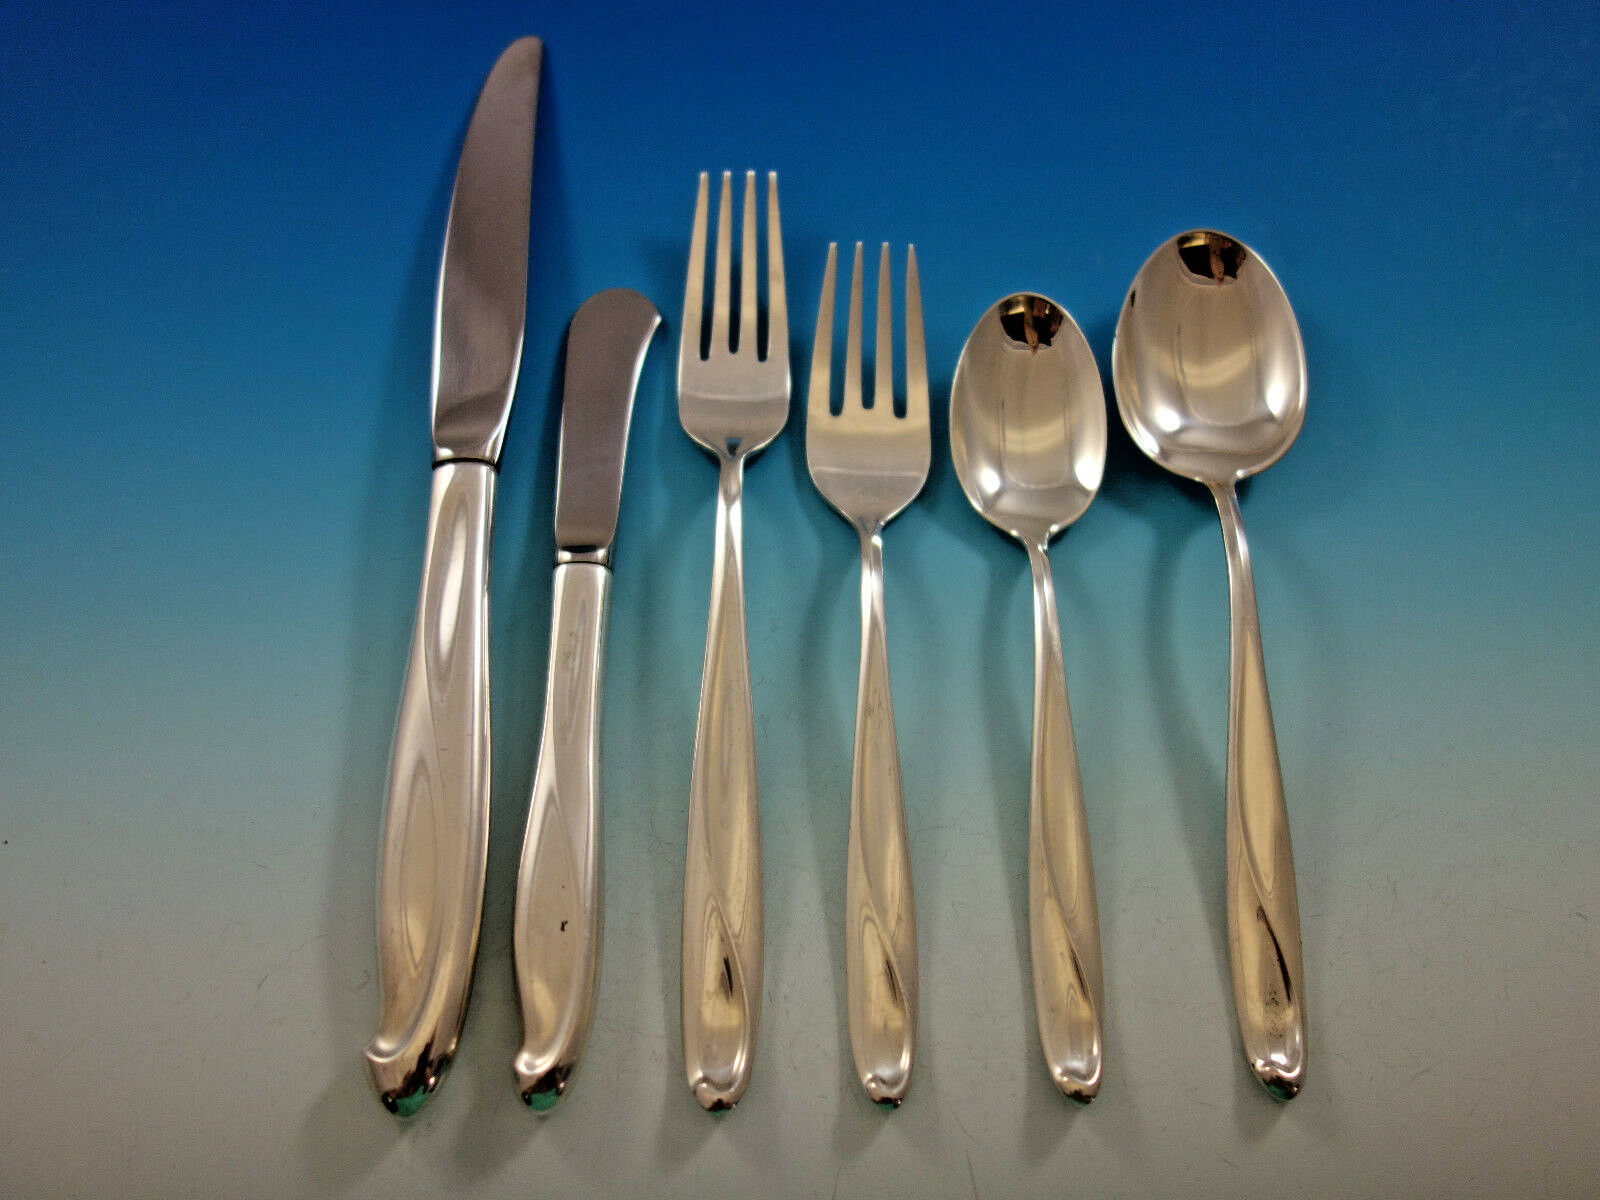 Silver Sculpture by Reed and Barton Sterling Silver Flatware Set Service 77 pcs - $4,650.00